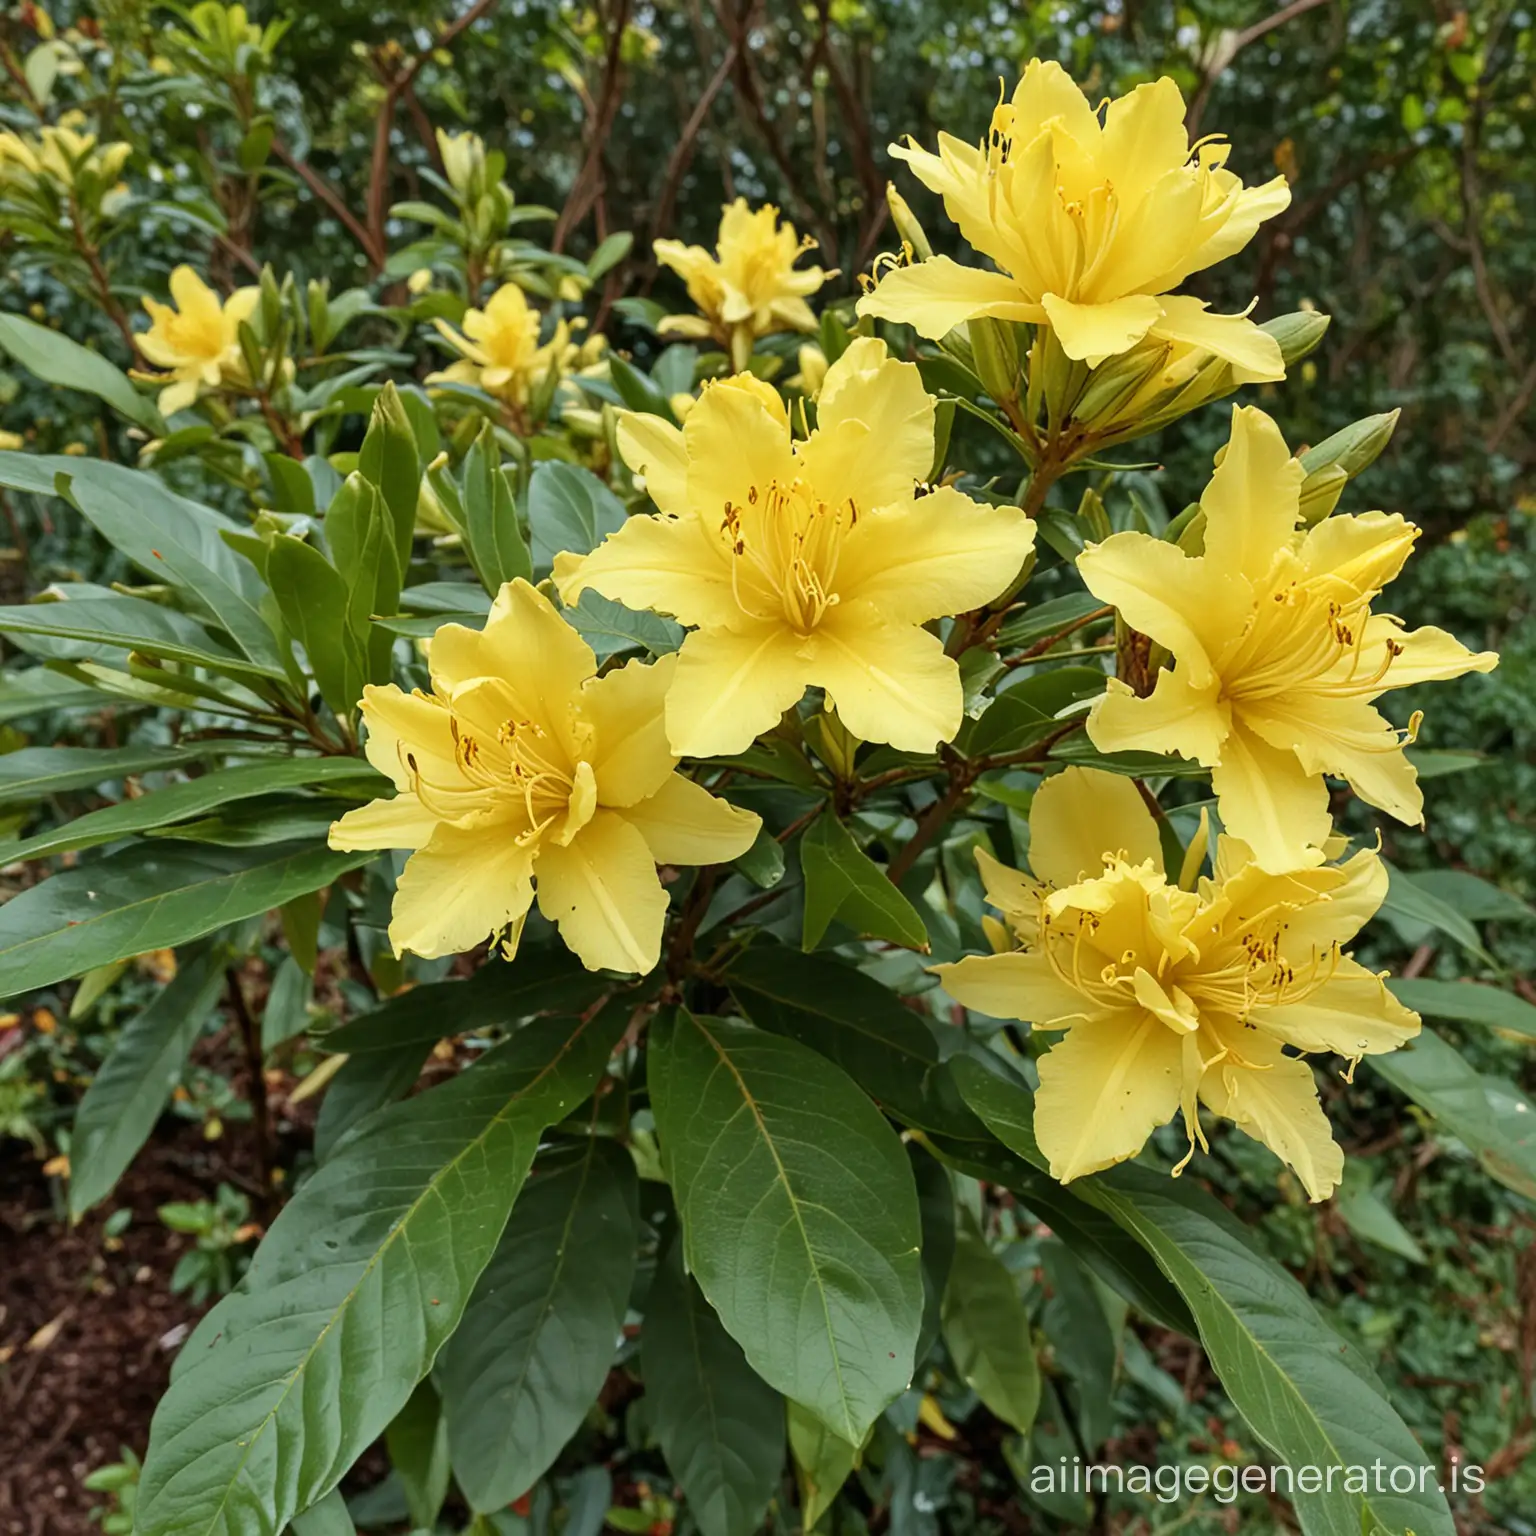 Vibrant-Rhododendron-Luteum-Blossoms-in-Spring-Garden